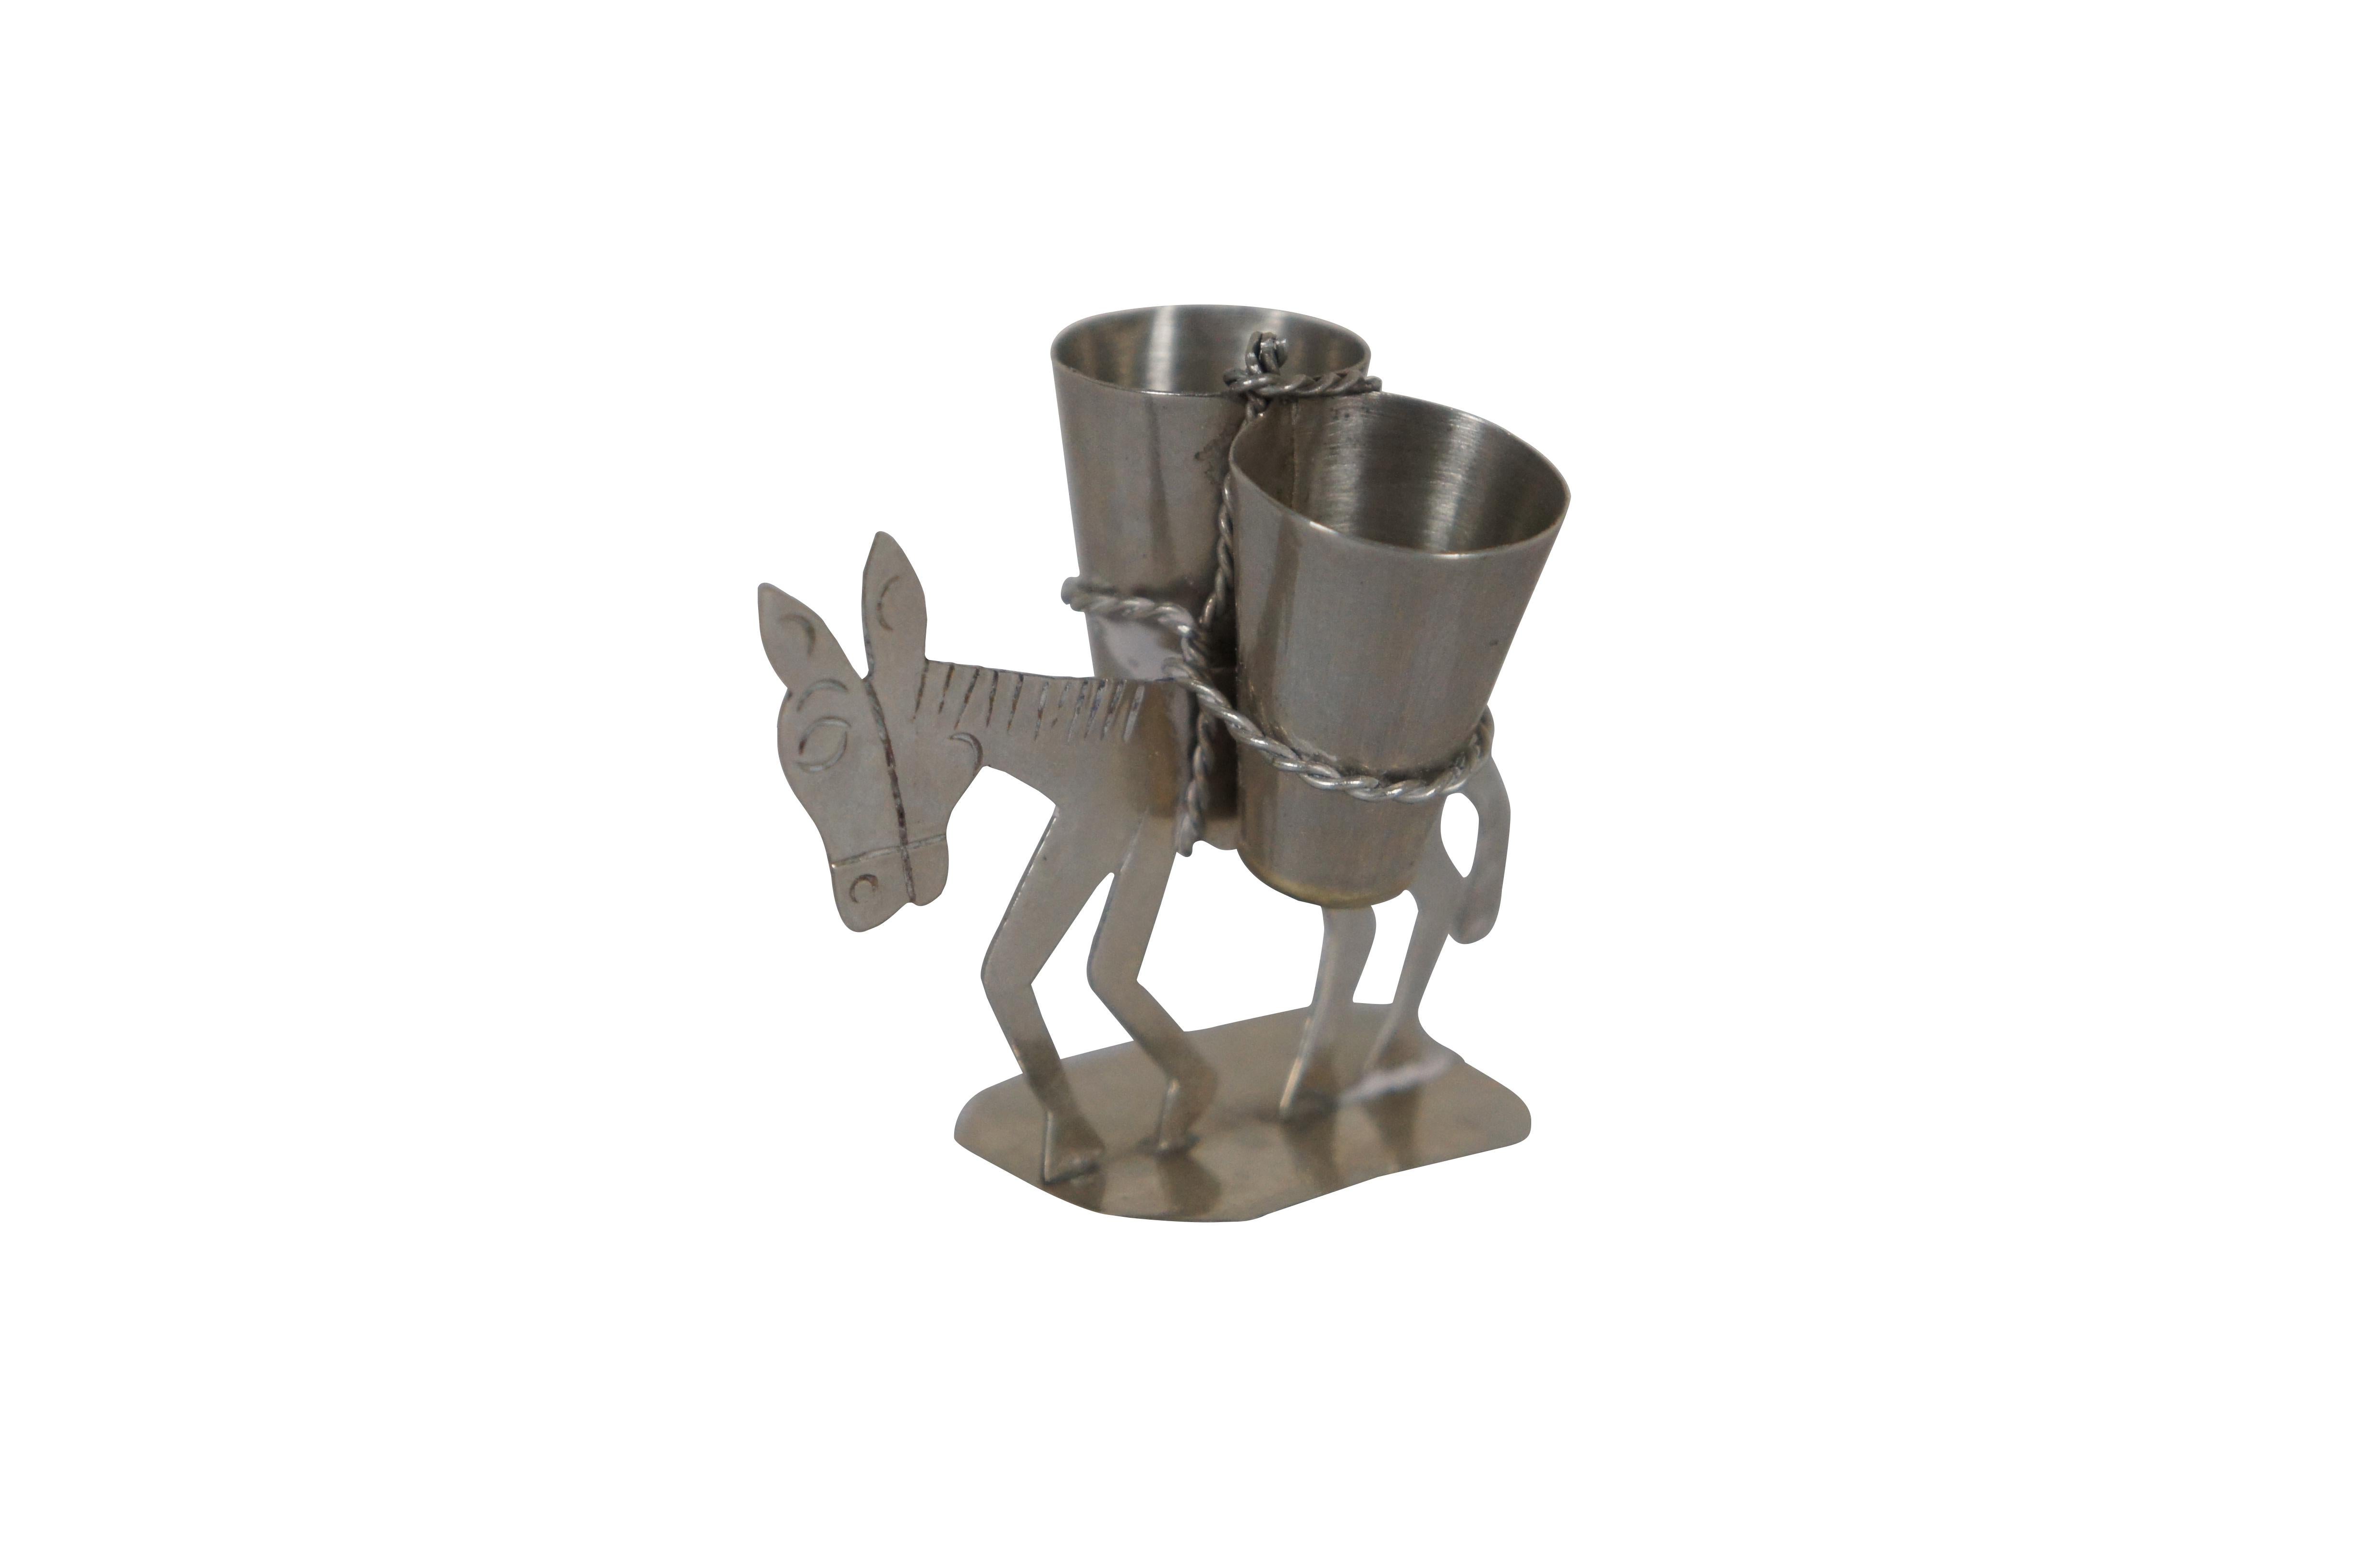 Vintage Mexican silver toothpick holder in the shape of a two dimensional donkey / burro carrying a pair of containers lashed with rope. Marked Taxco on base.

Dimensions:
2